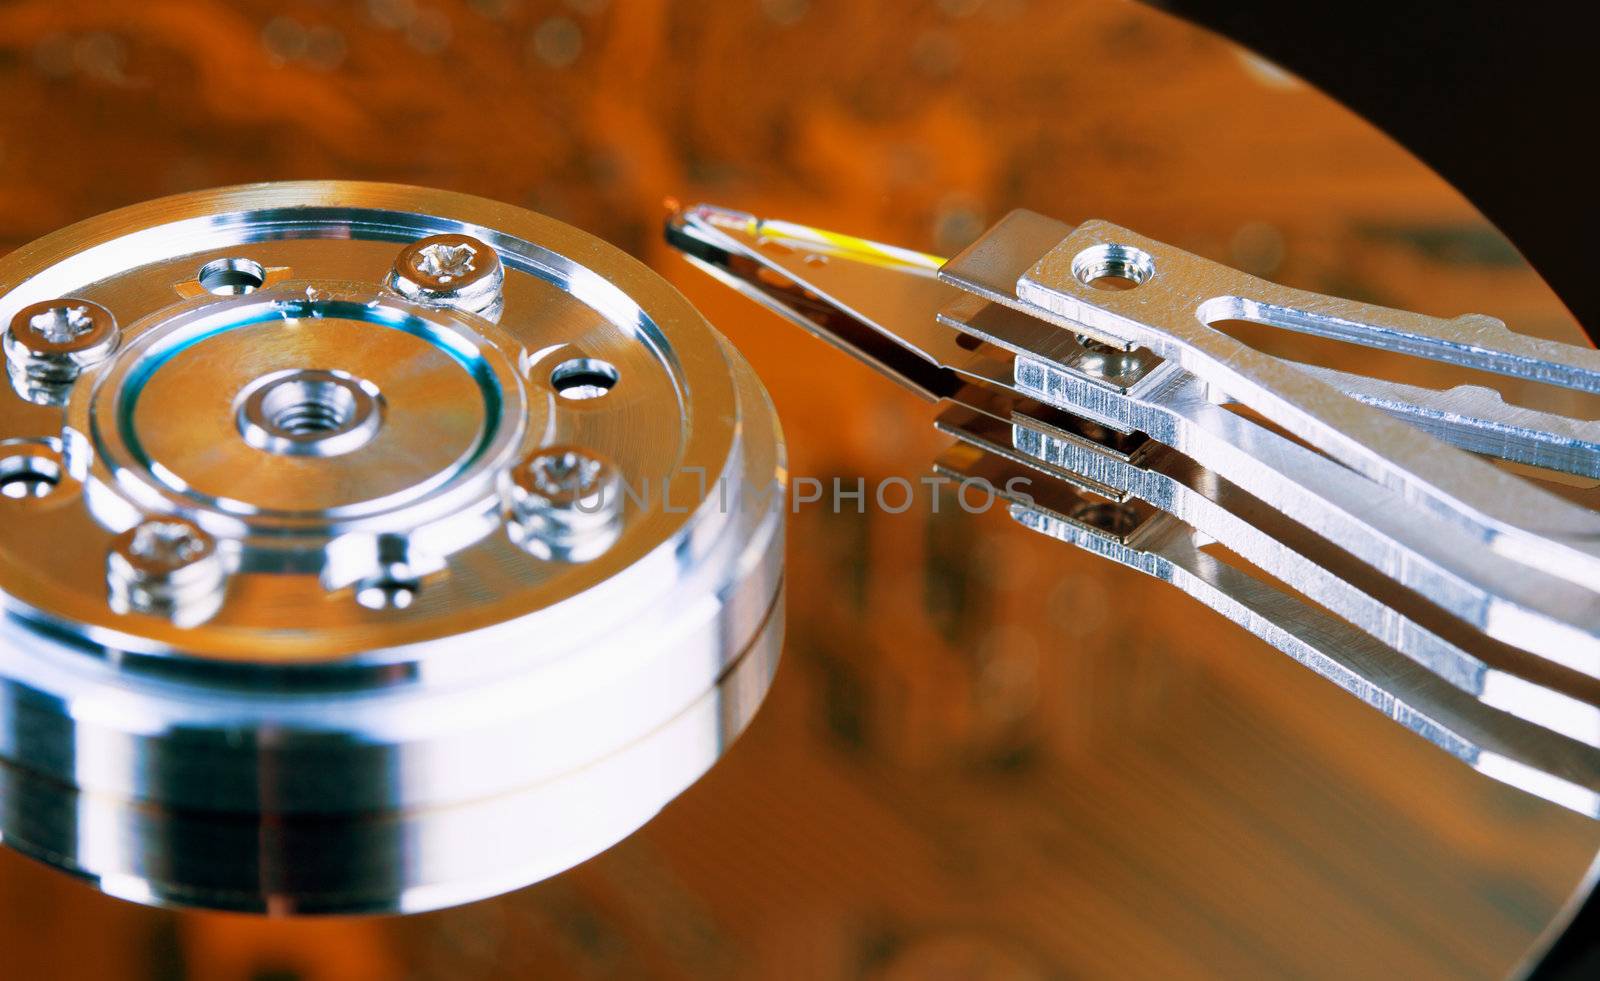 The surface of the hard disk - an unusual lighting